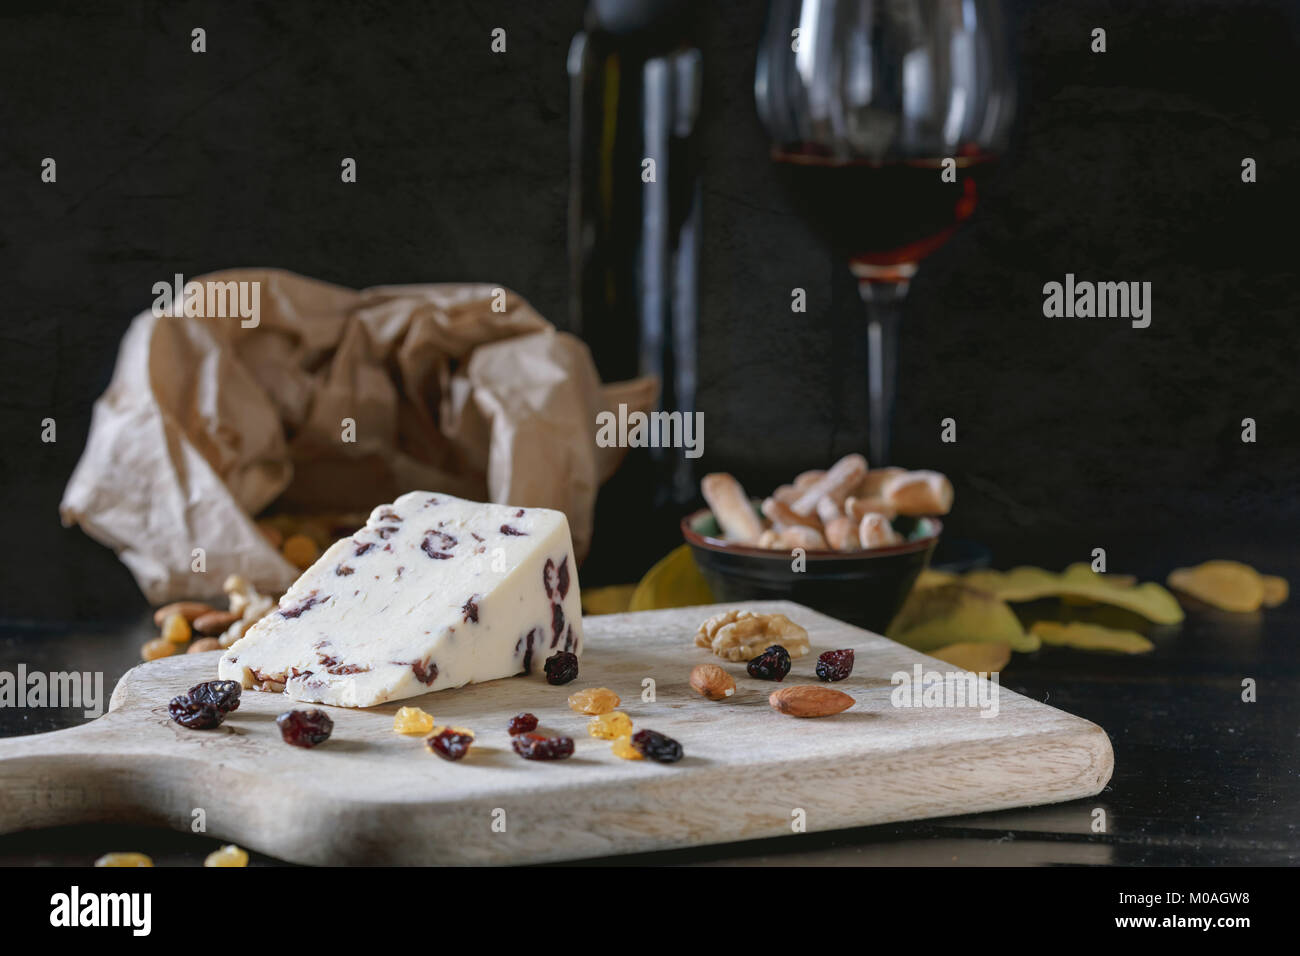 Wensleydale cheese with cranberries, red wine, honey, nuts, raisins on wooden cutting board. Black concrete background. Selective focus. Stock Photo